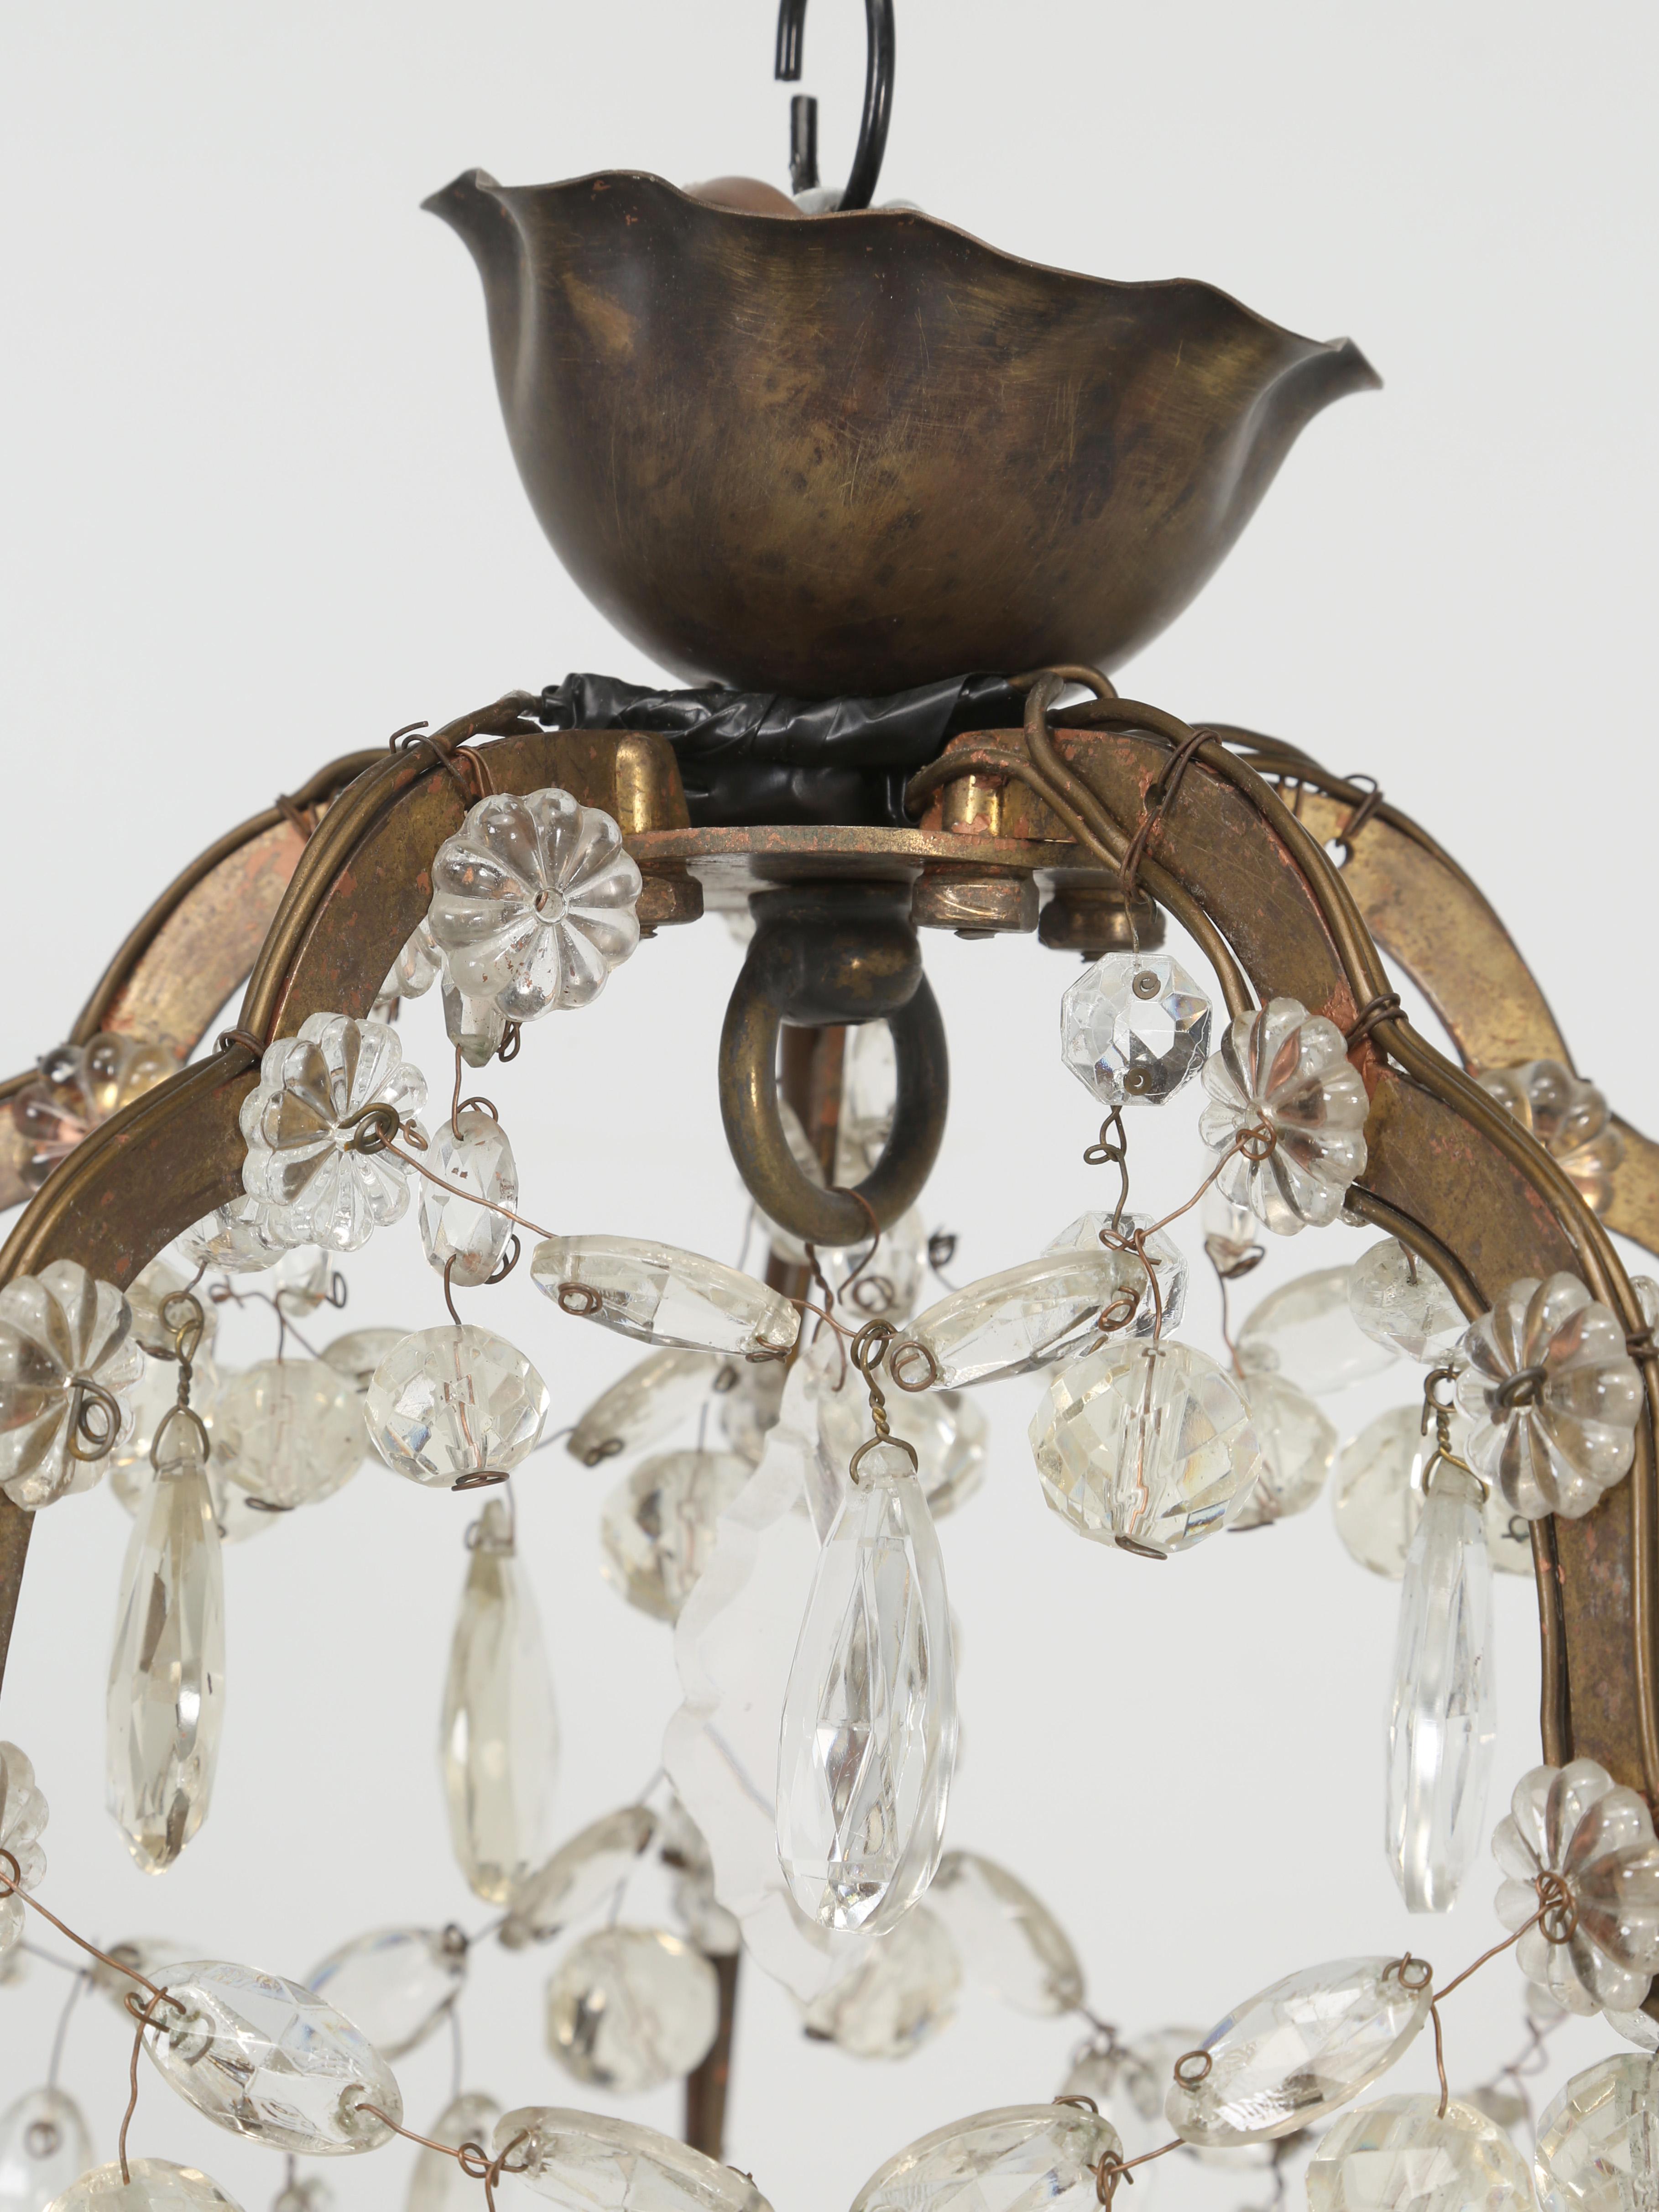 Vintage French crystal chandelier in as found, but working condition. Missing several crystals and priced accordingly. 
**Height provided does not include the canopy. The canopy is 2.5